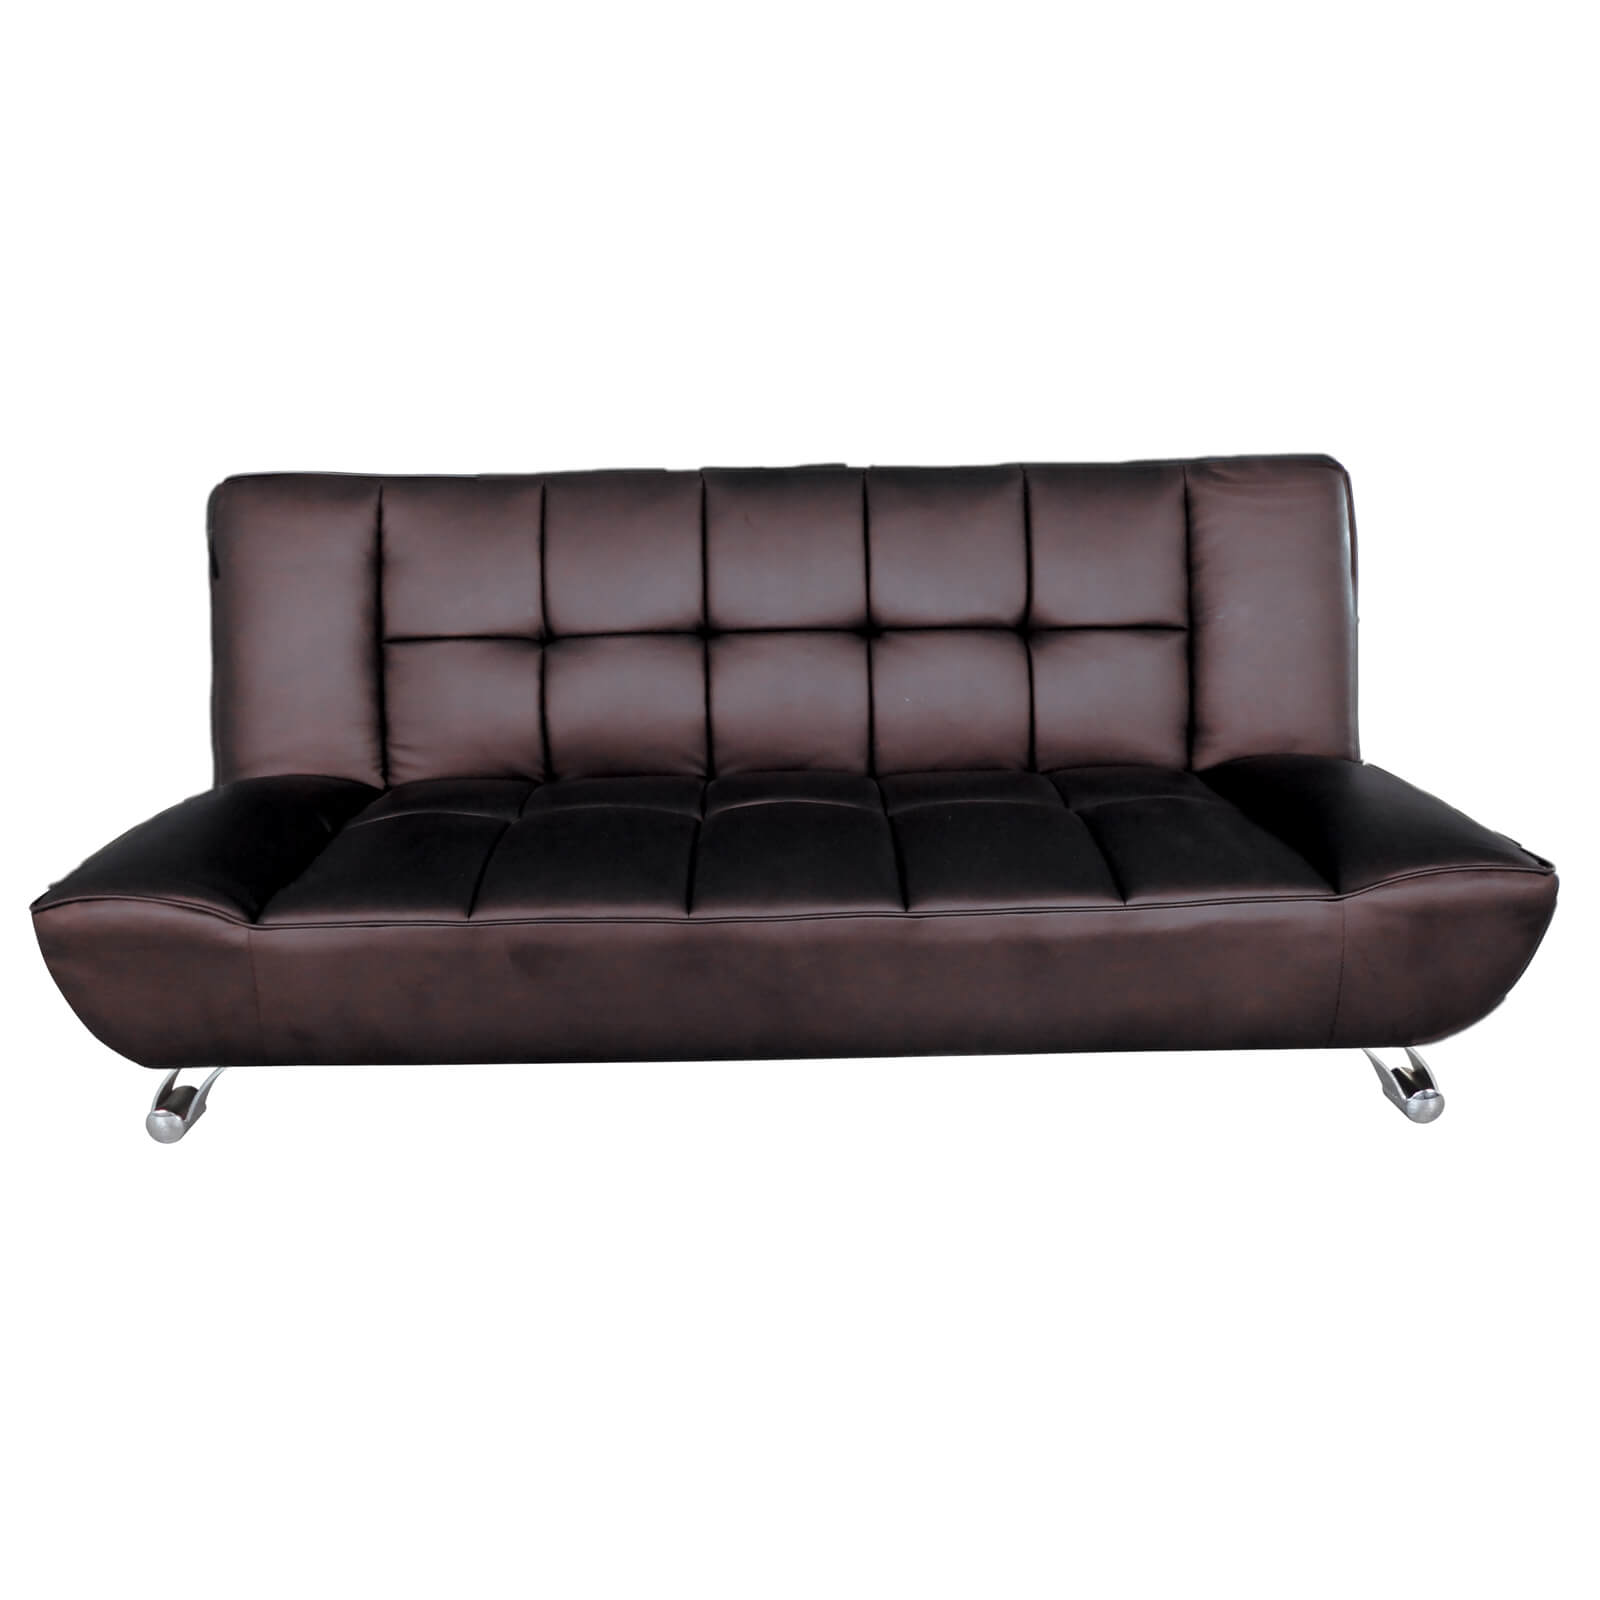 Vogue Sofa Bed - Brown - Faux Leather